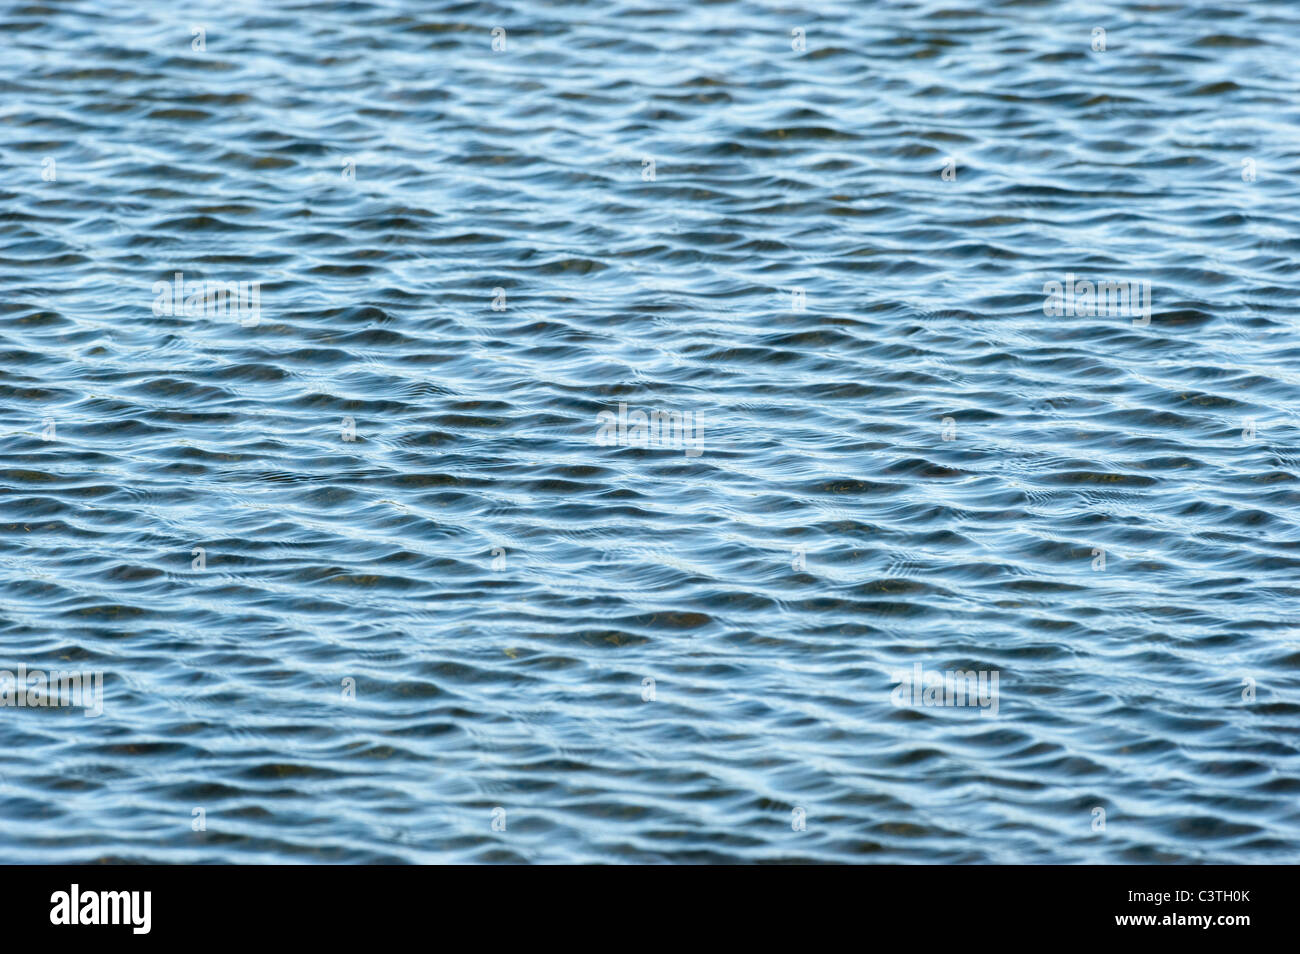 Ripples on surface of small pond. Stock Photo